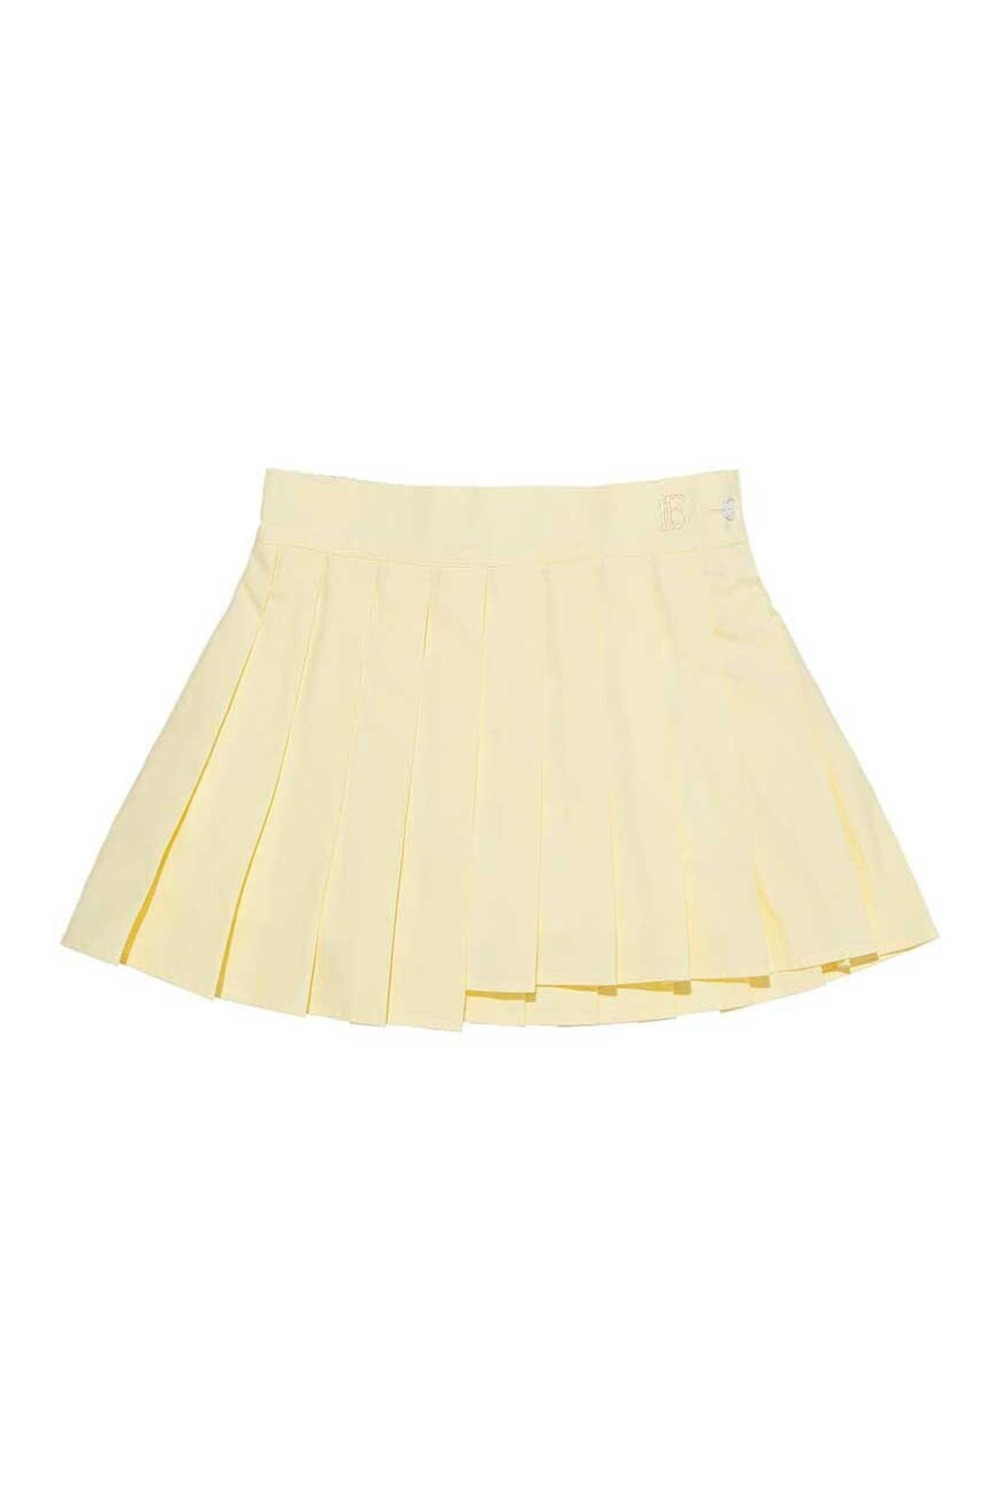 LOVEFORTY UNBALNCED PLEATED SKIRT (YELLOW) RICHEZ